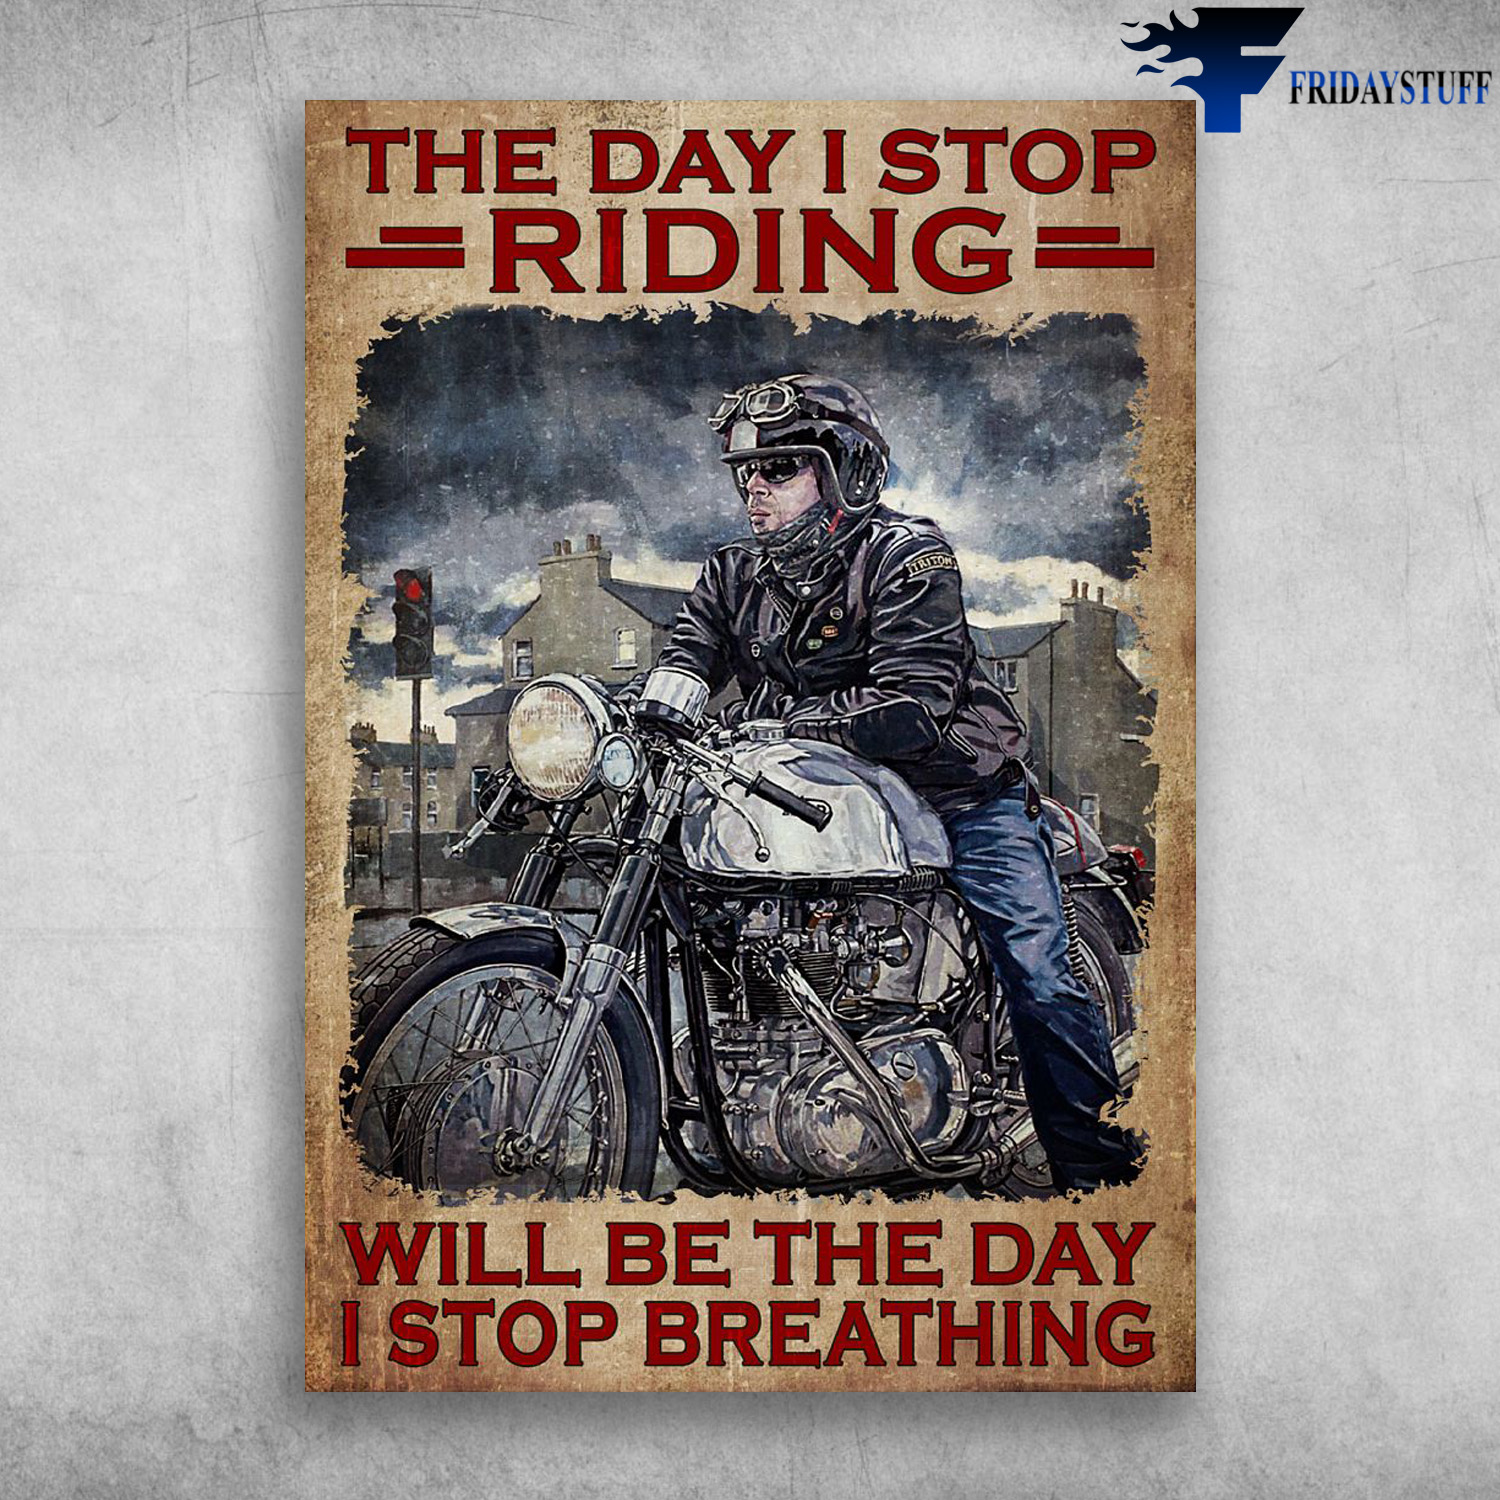 Motorcycle Man, Biker - The Day I Stop Riding, Will Be The Day I Stop Breathing